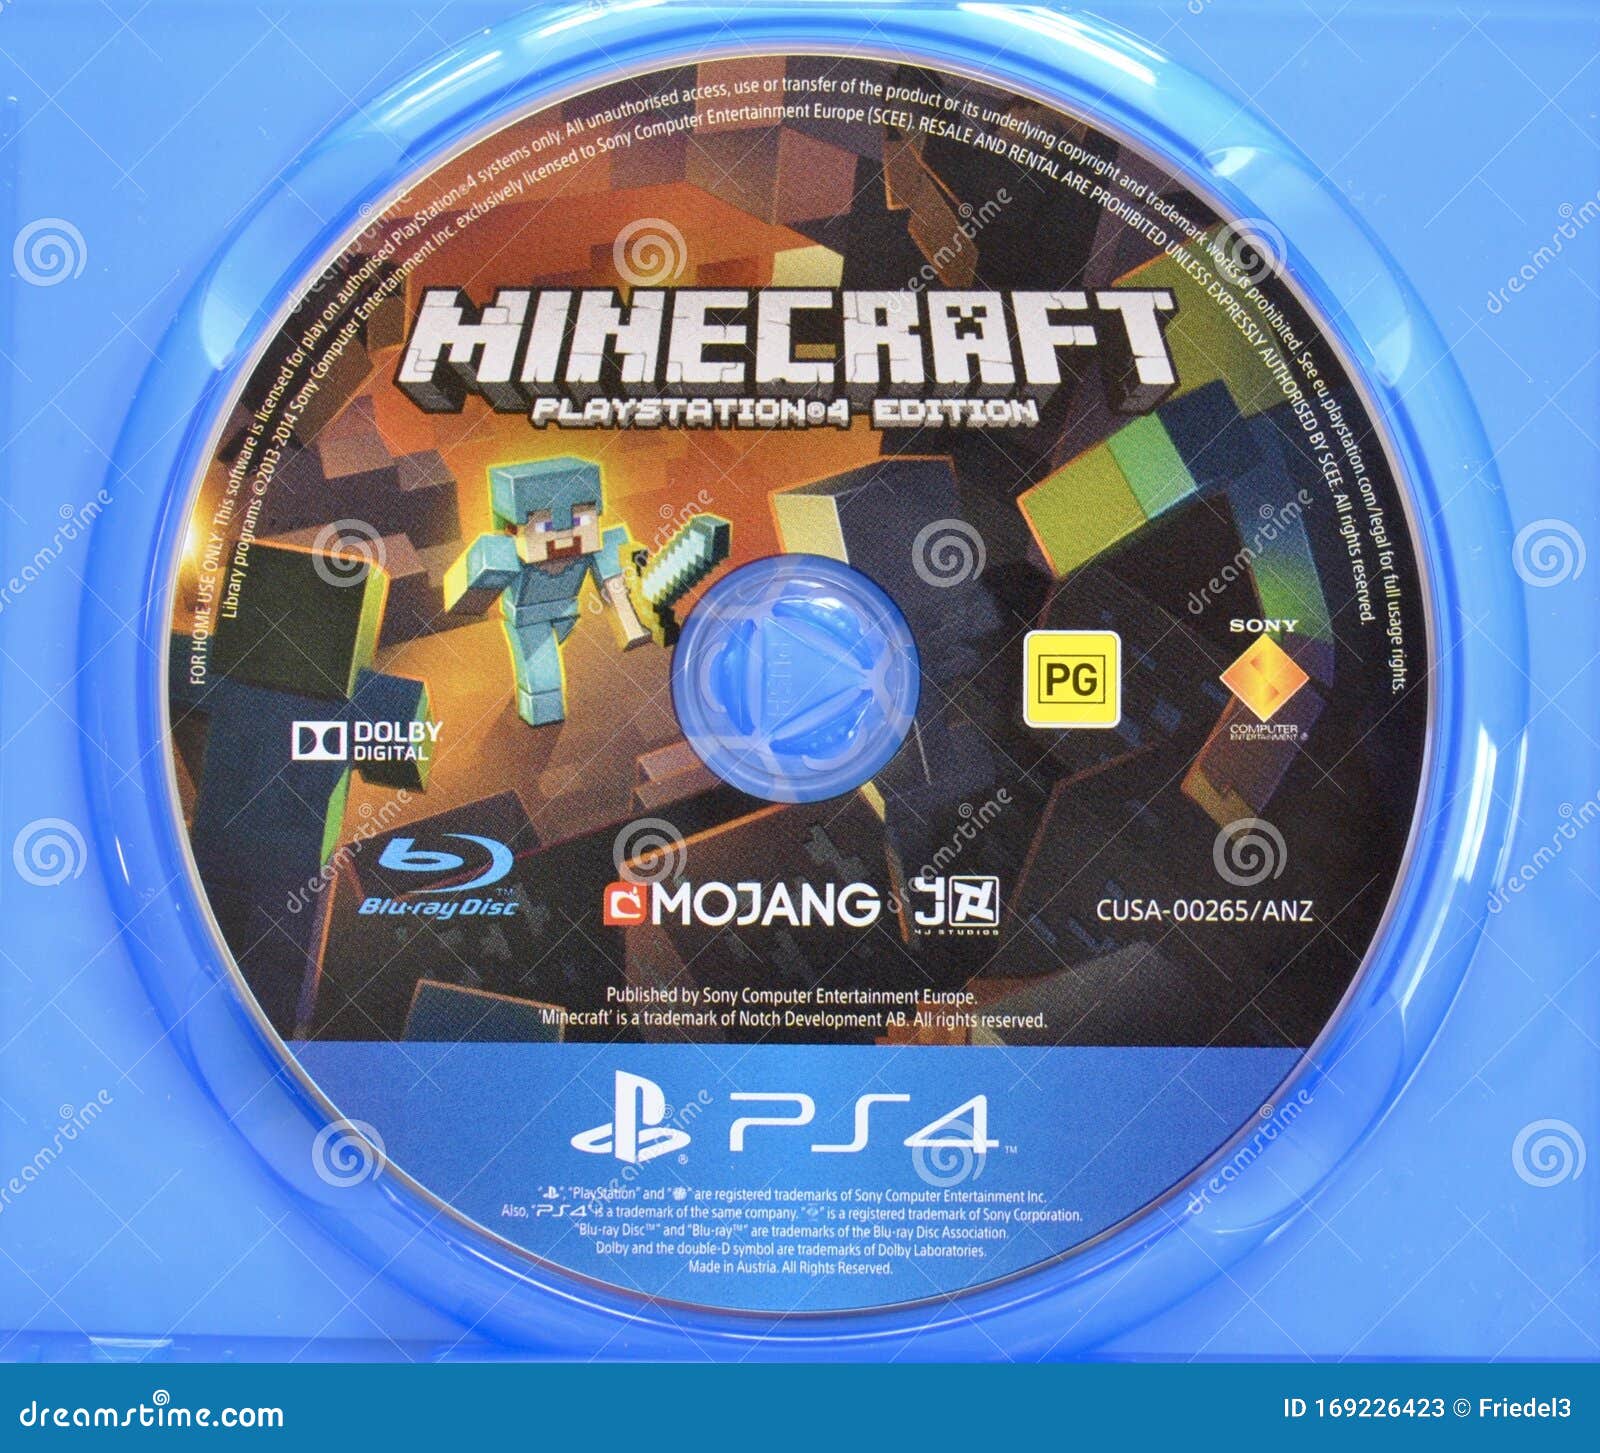 Ps4 Minecraft Playstation Edition Game Disc Editorial Stock Photo Image Of Disc Case